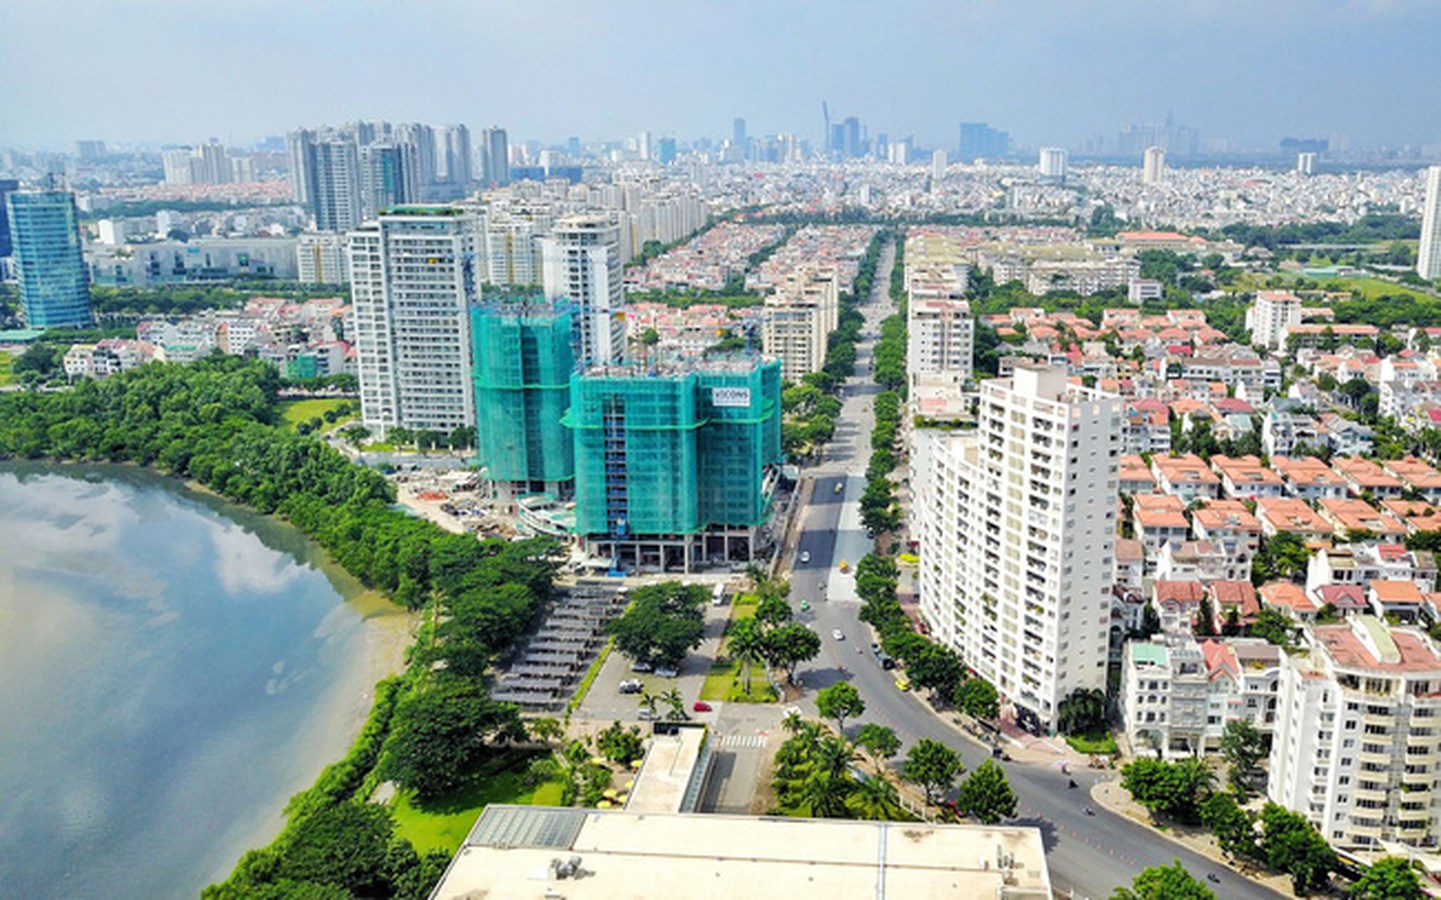 The Prime Minister has asked the Ministry of Construction (MOC) and relevant ministries to complete legal systems relating to the local property market. (Photo: thoibaotaichinhvietnam.vn)